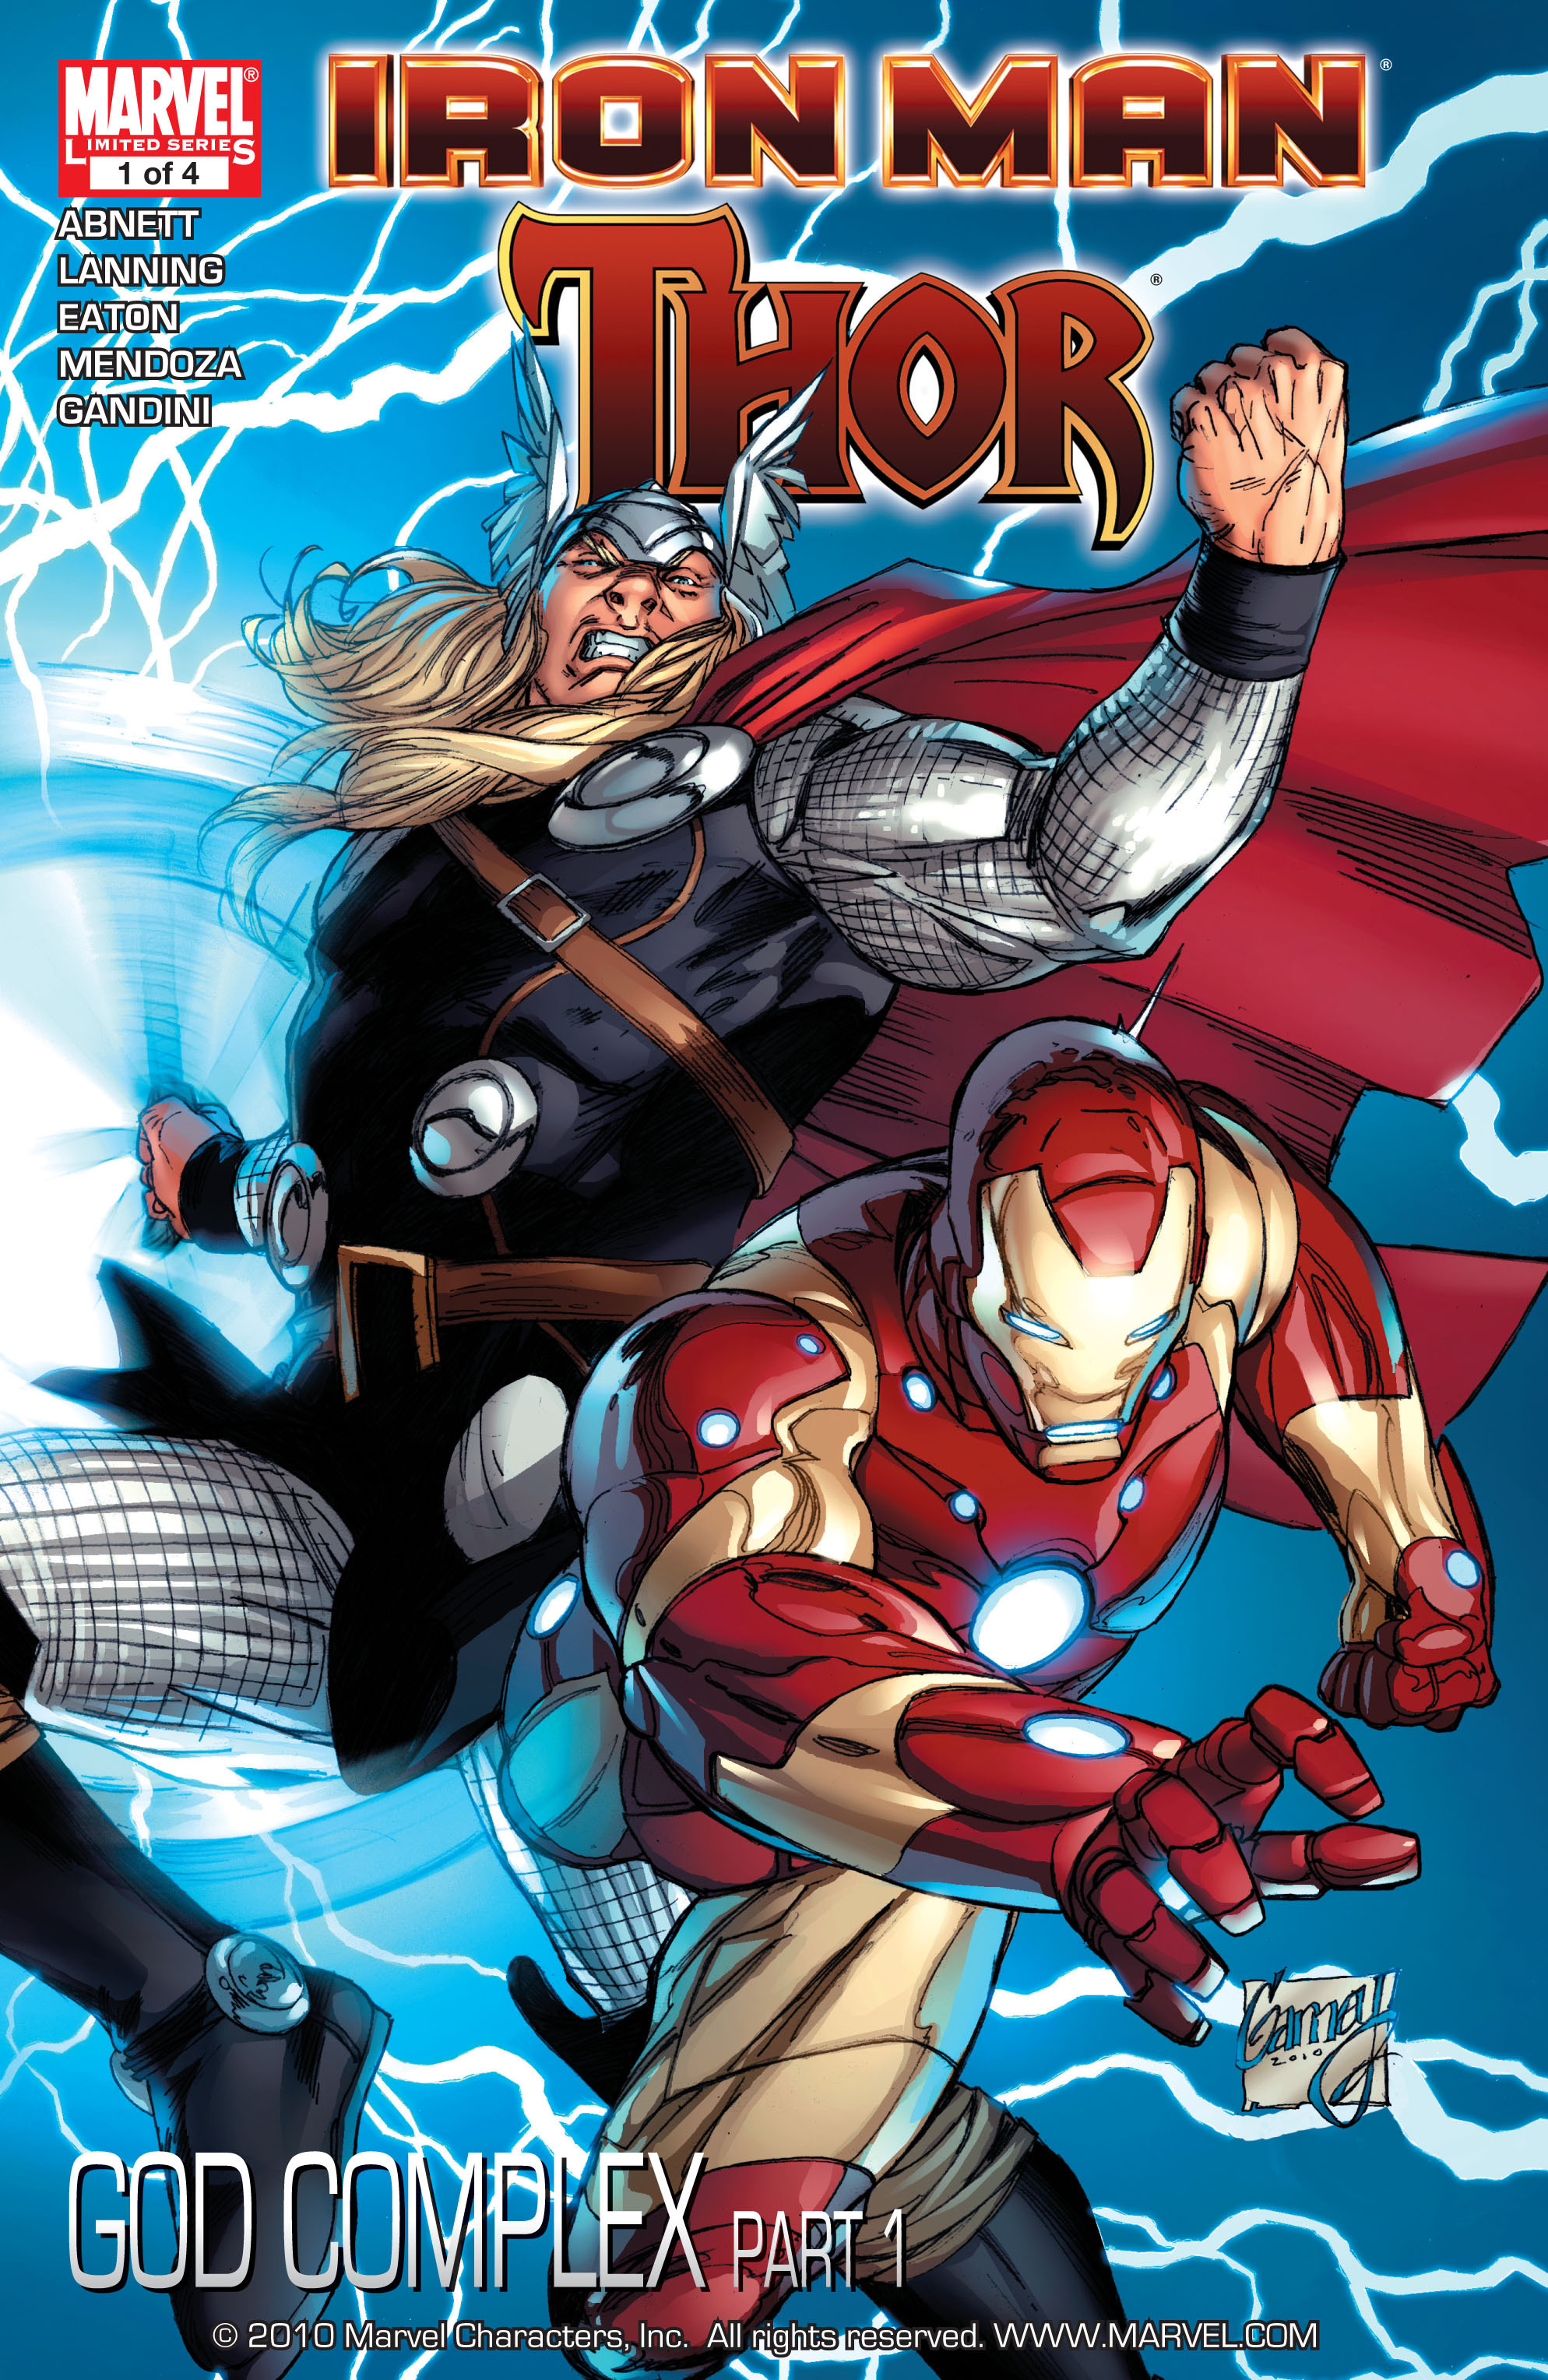 Read online Iron Man/Thor comic -  Issue #1 - 1